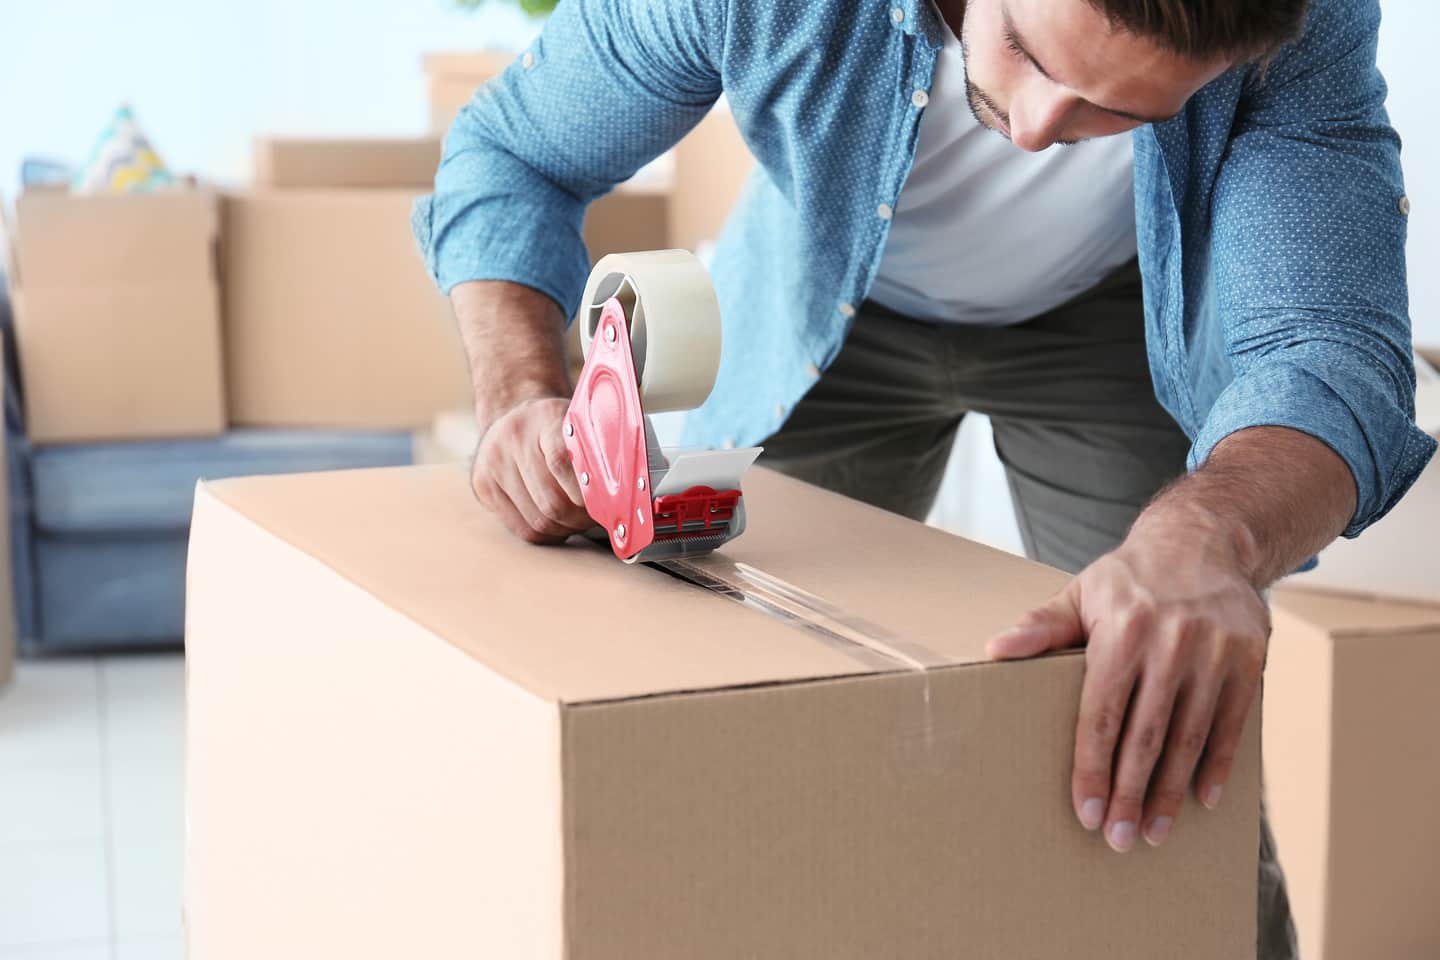 5 Tips to Help You Prepare for Your Move